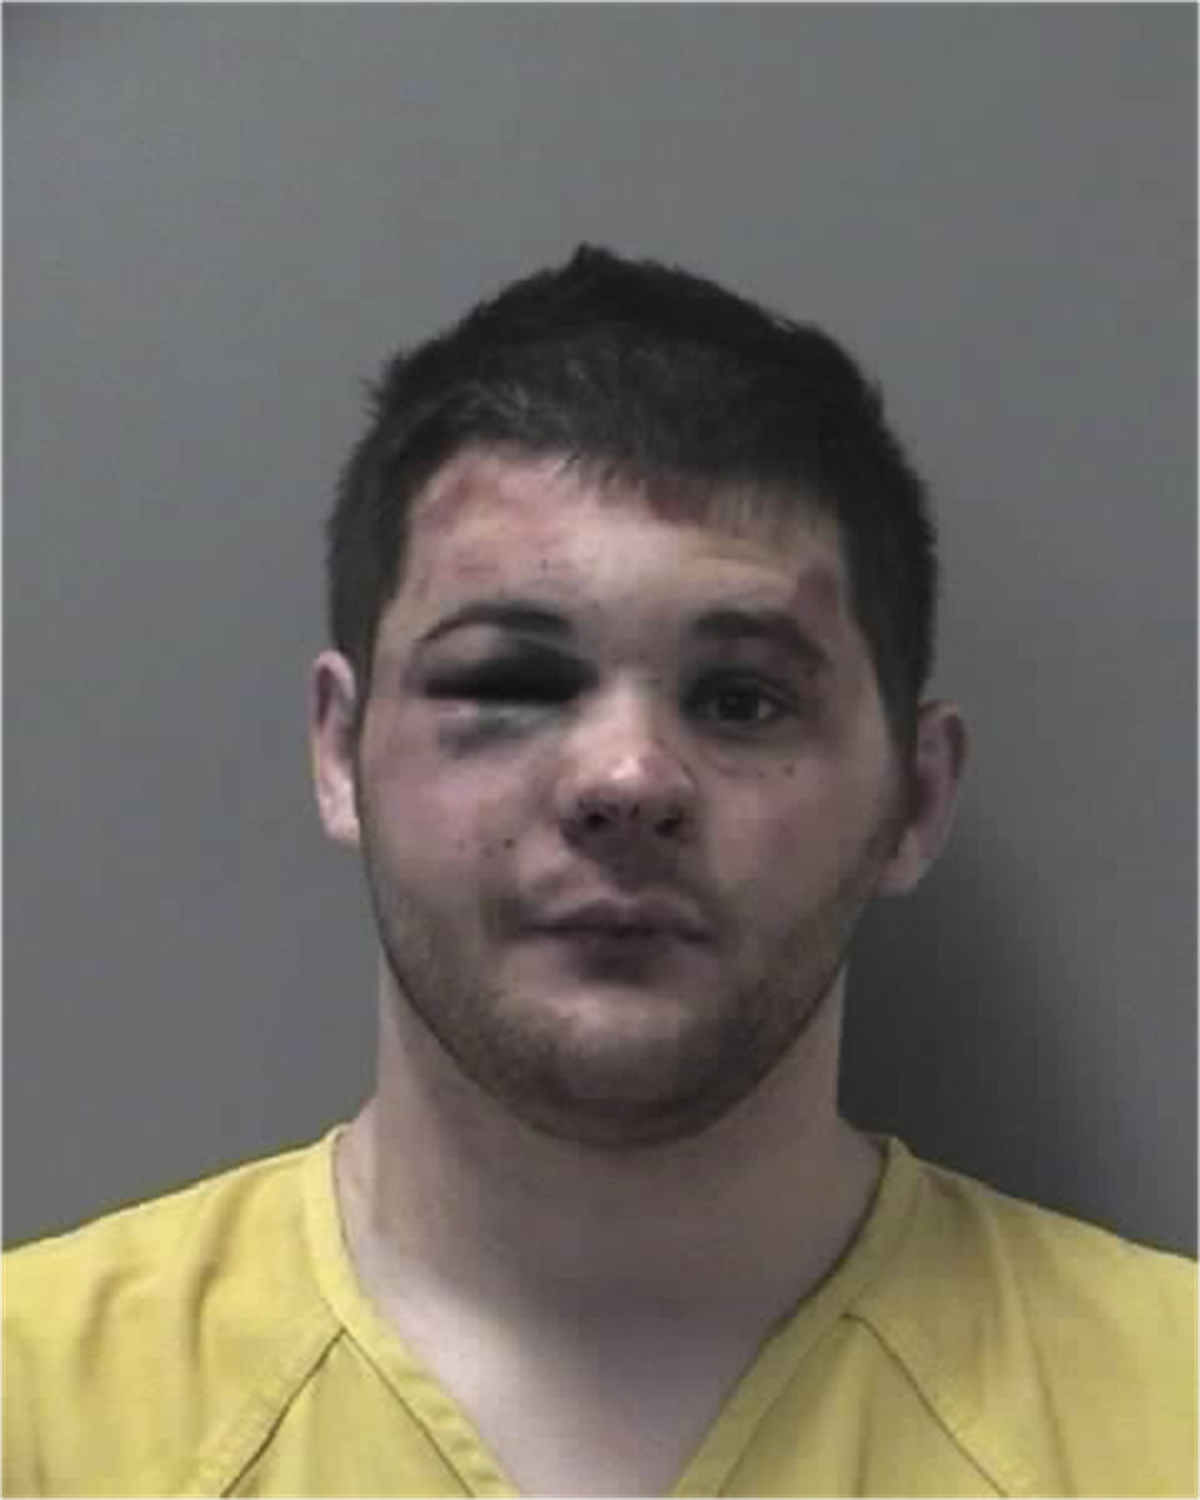 Adam M. Johnson, 25, was arrested early Sunday, accused of a shooting in downtown Coeur d